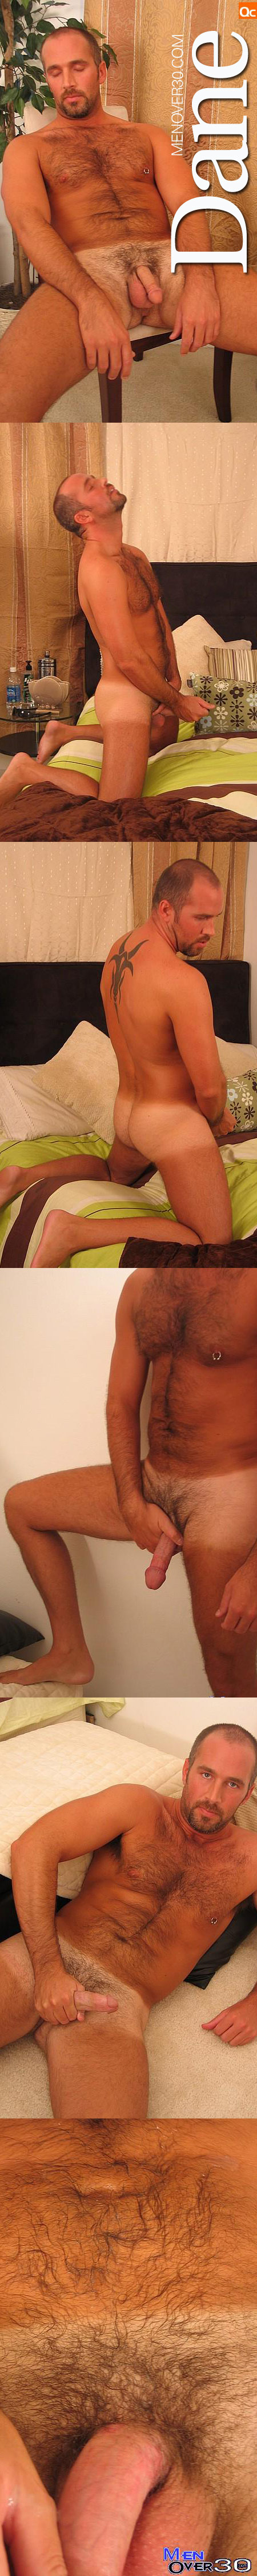 thirty and hairy and hard and hot